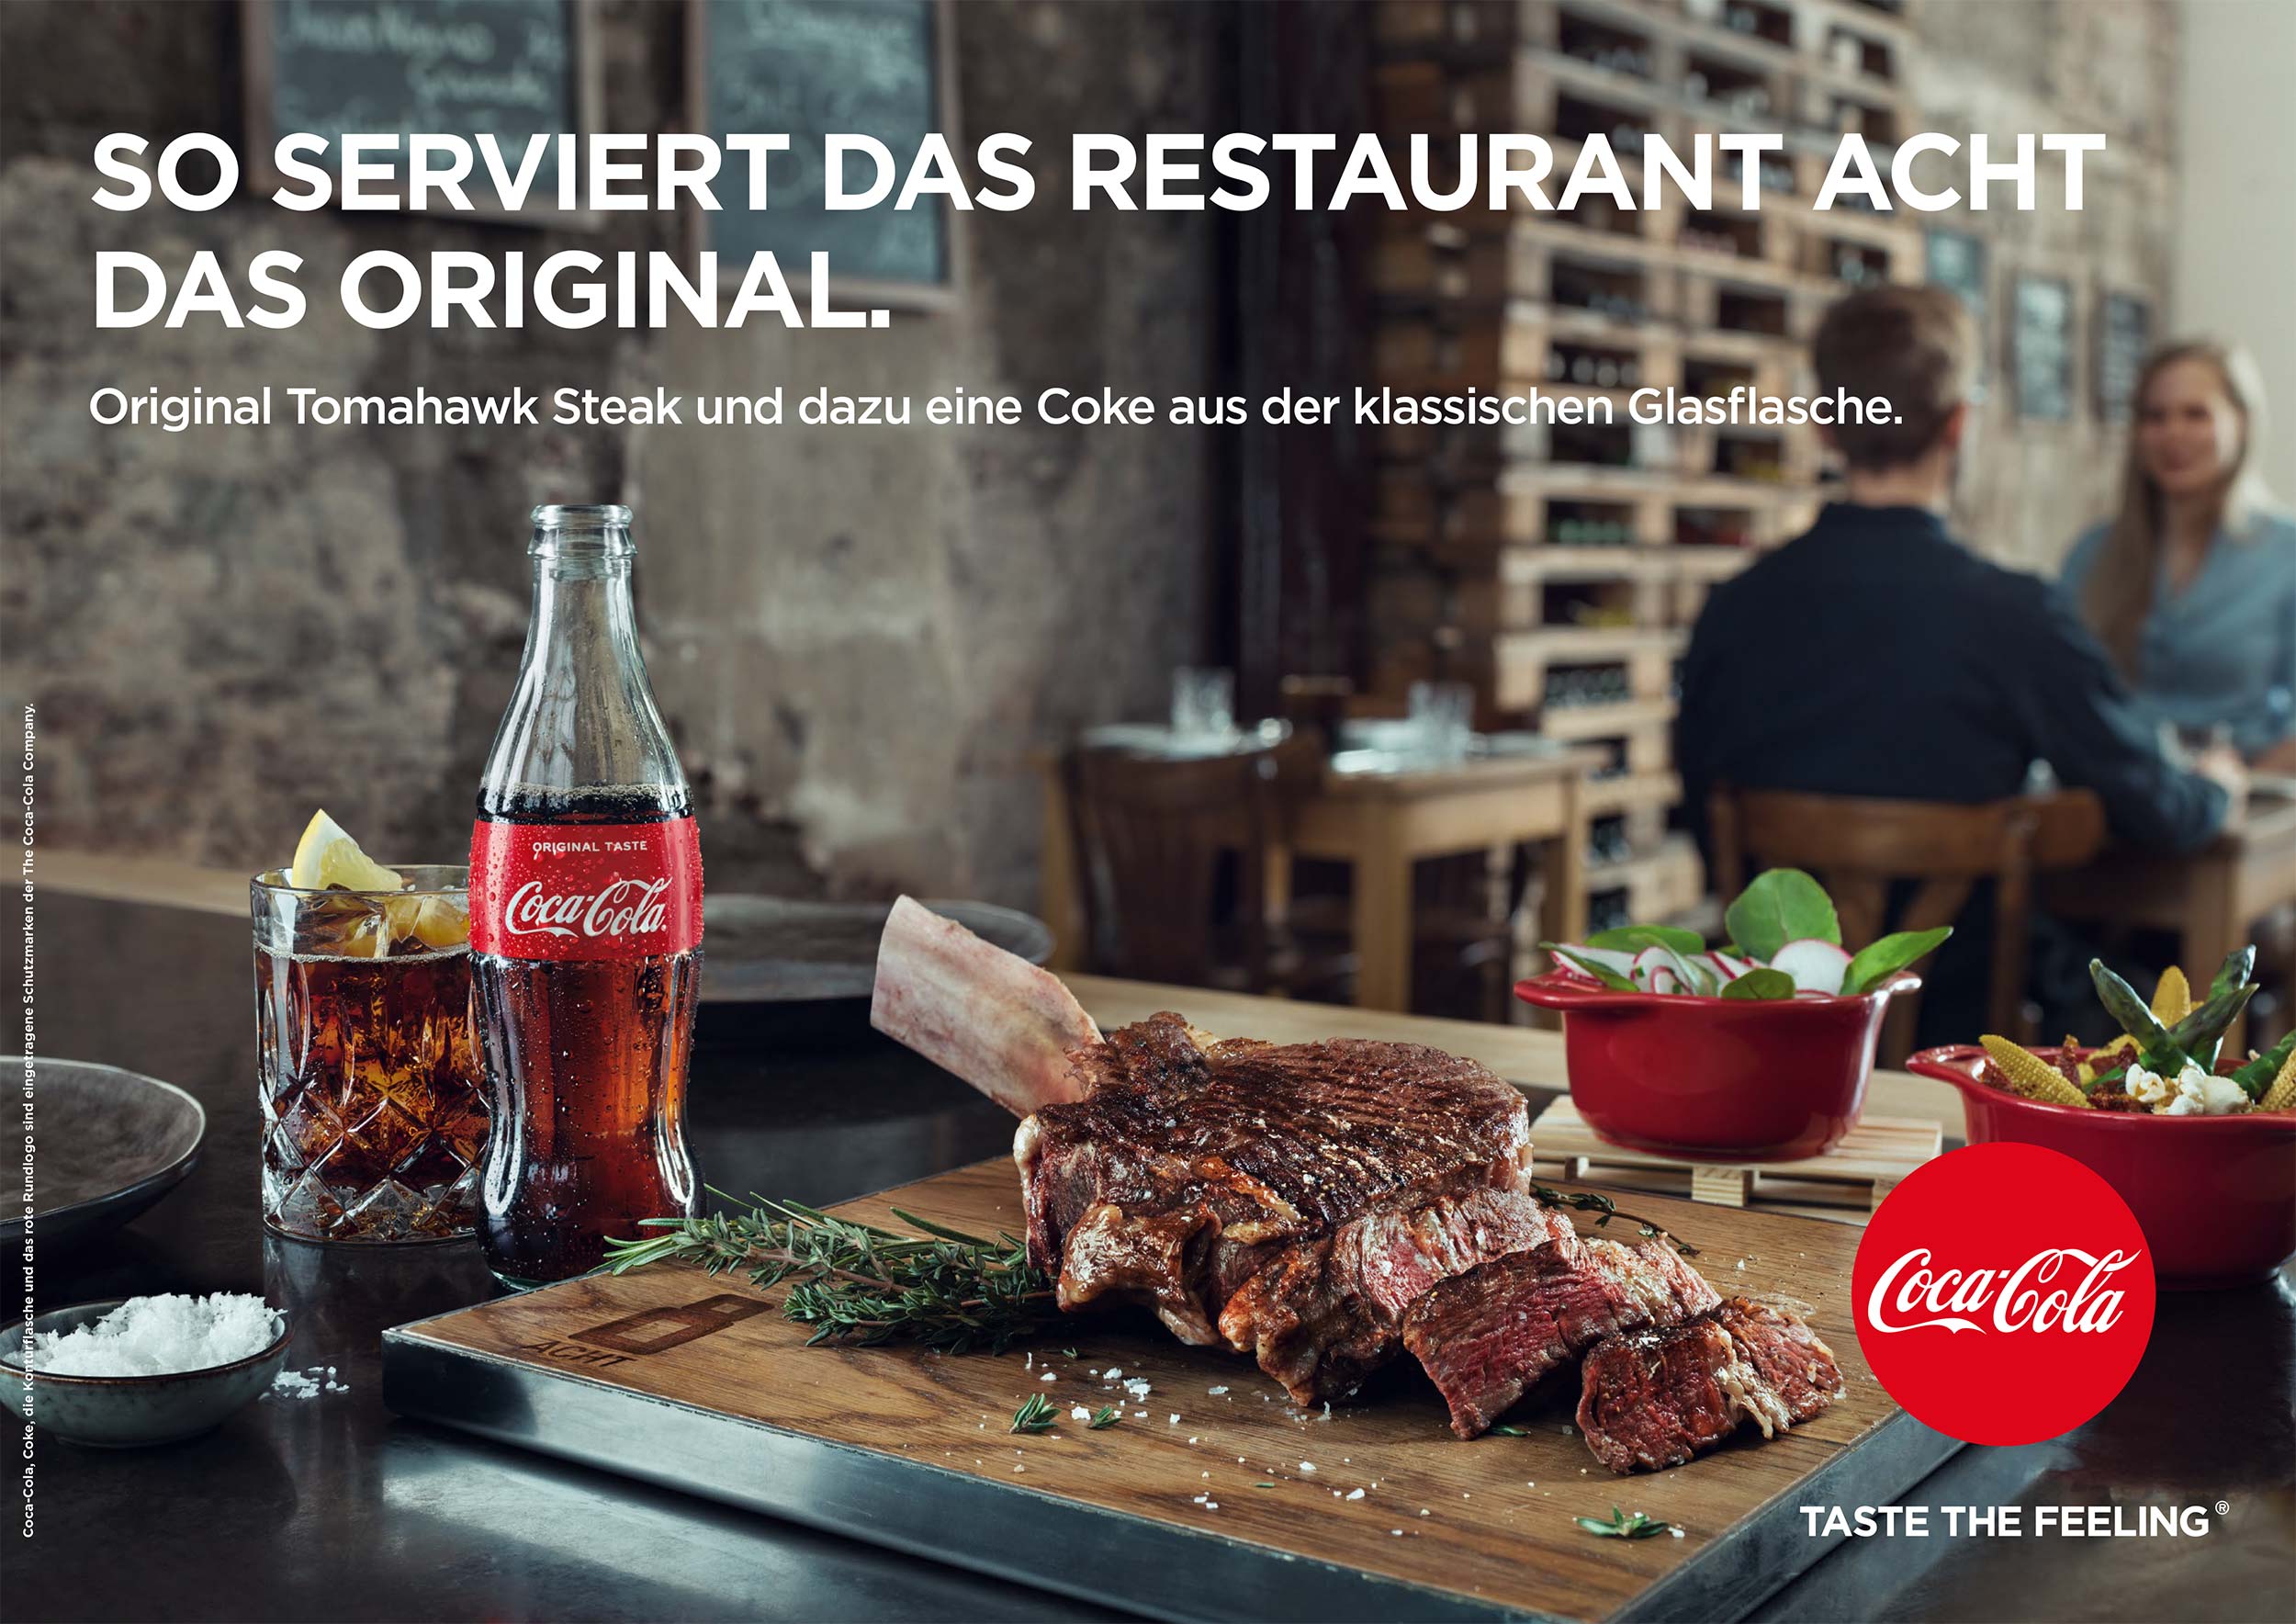 Meat and Coca-cola bottles in restaurant Acht with persons in background